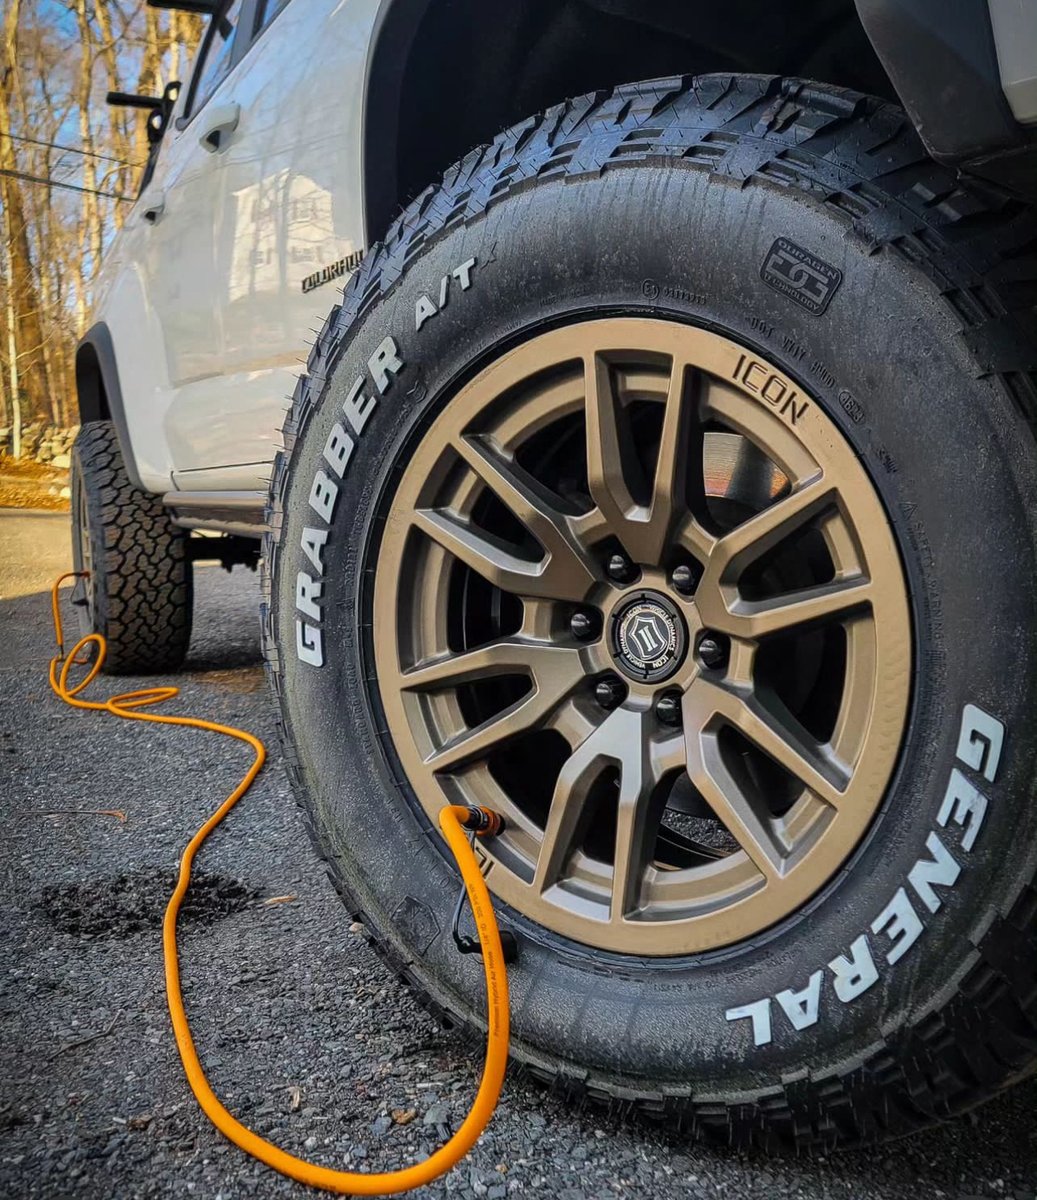 Proper tire pressure for a proper all-terrain tire. #GTdeLIVErs the finer things. 🤌

📸: @varsityoverland on IG!